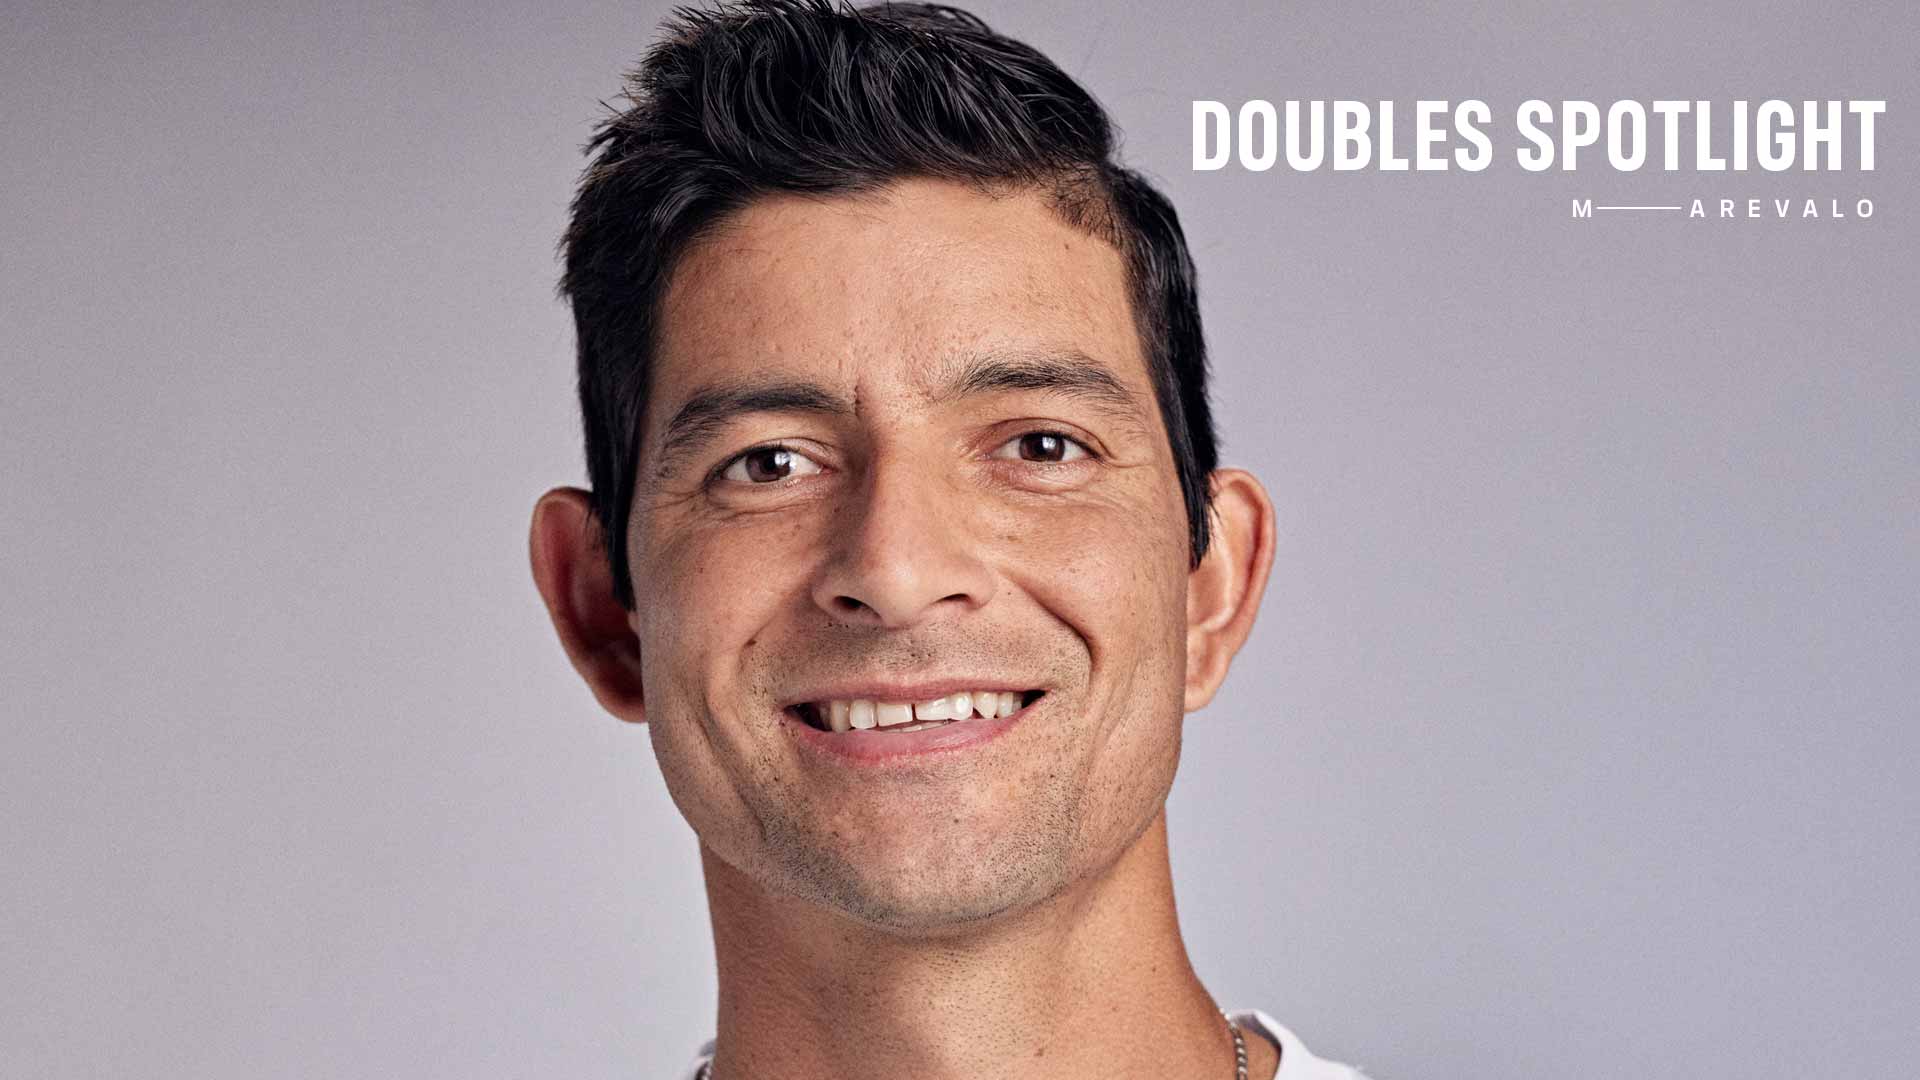 Marcelo Arevalo and partner Jean-Julien Rojer won their first major title together at Roland Garros.